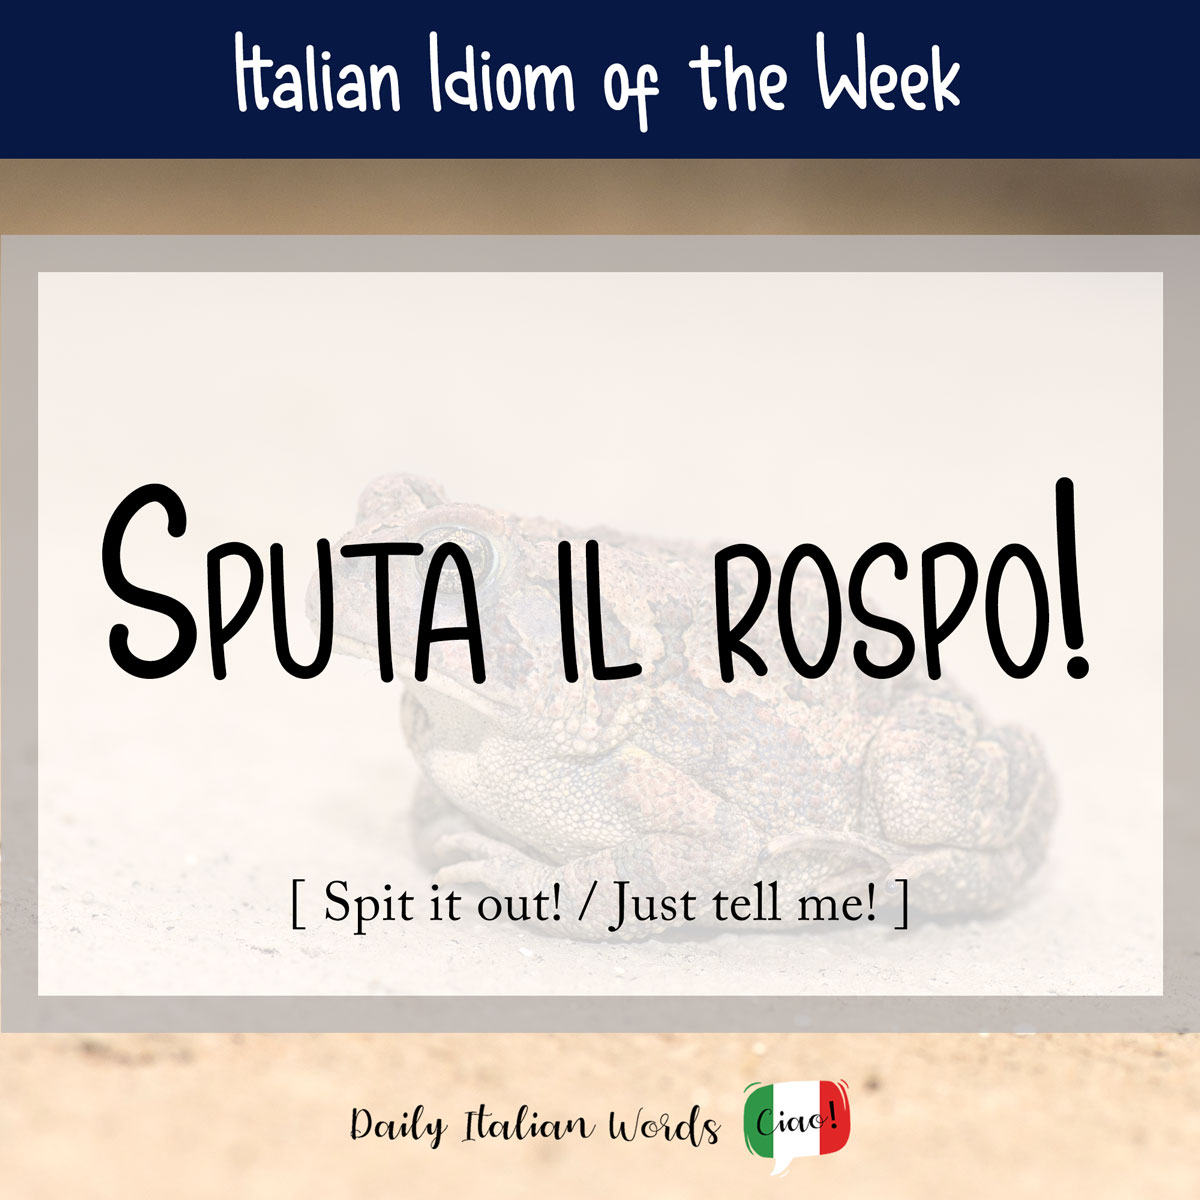 Italian proverb: Spit it out!  (Spit it out!)